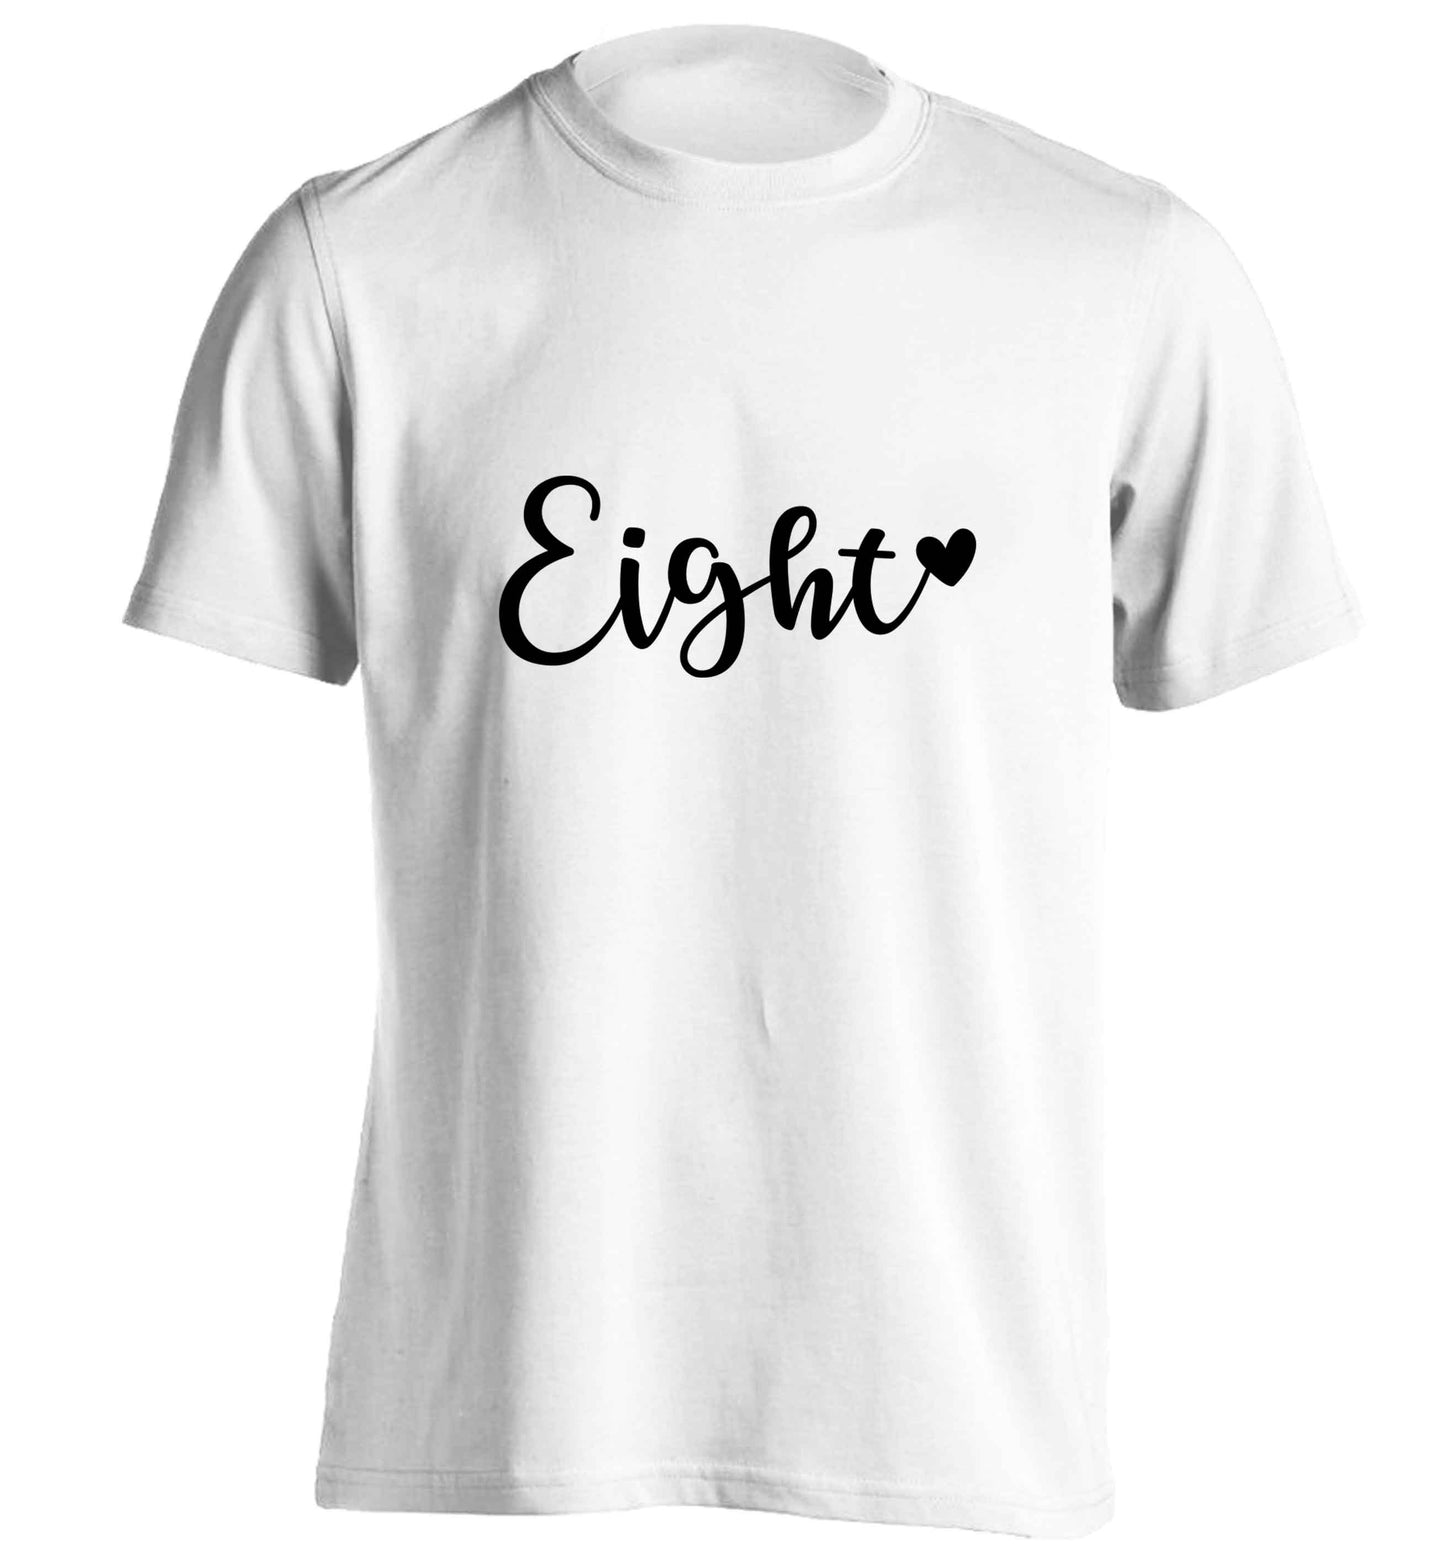 Eight and heart adults unisex white Tshirt 2XL